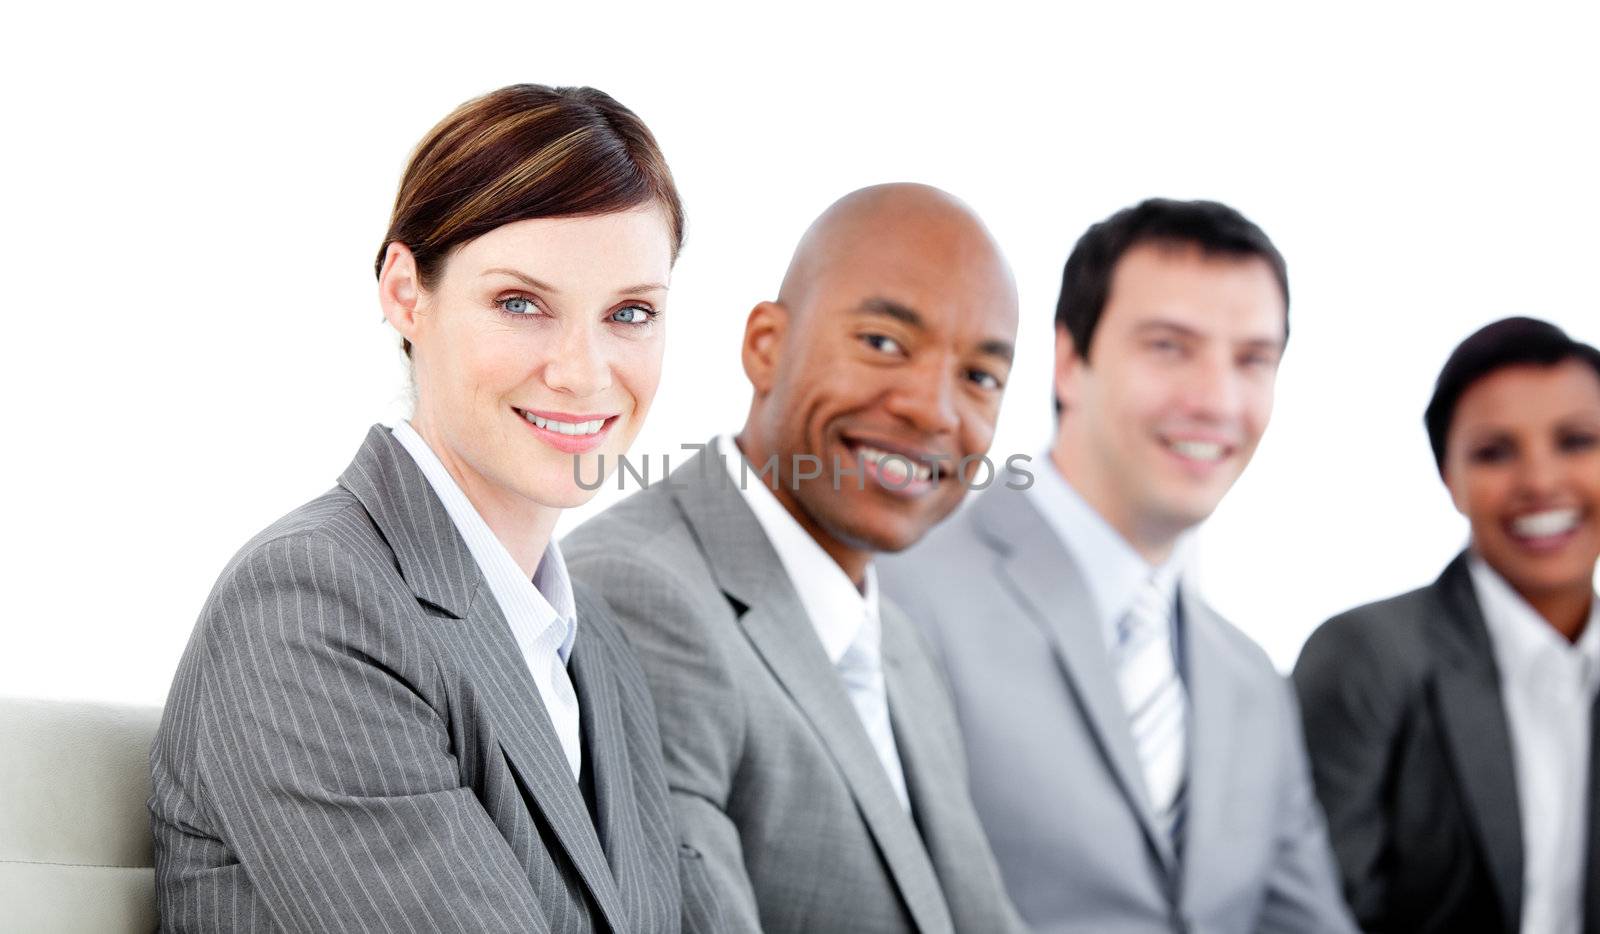 Portrait of smiling business team during a presentation against a white background